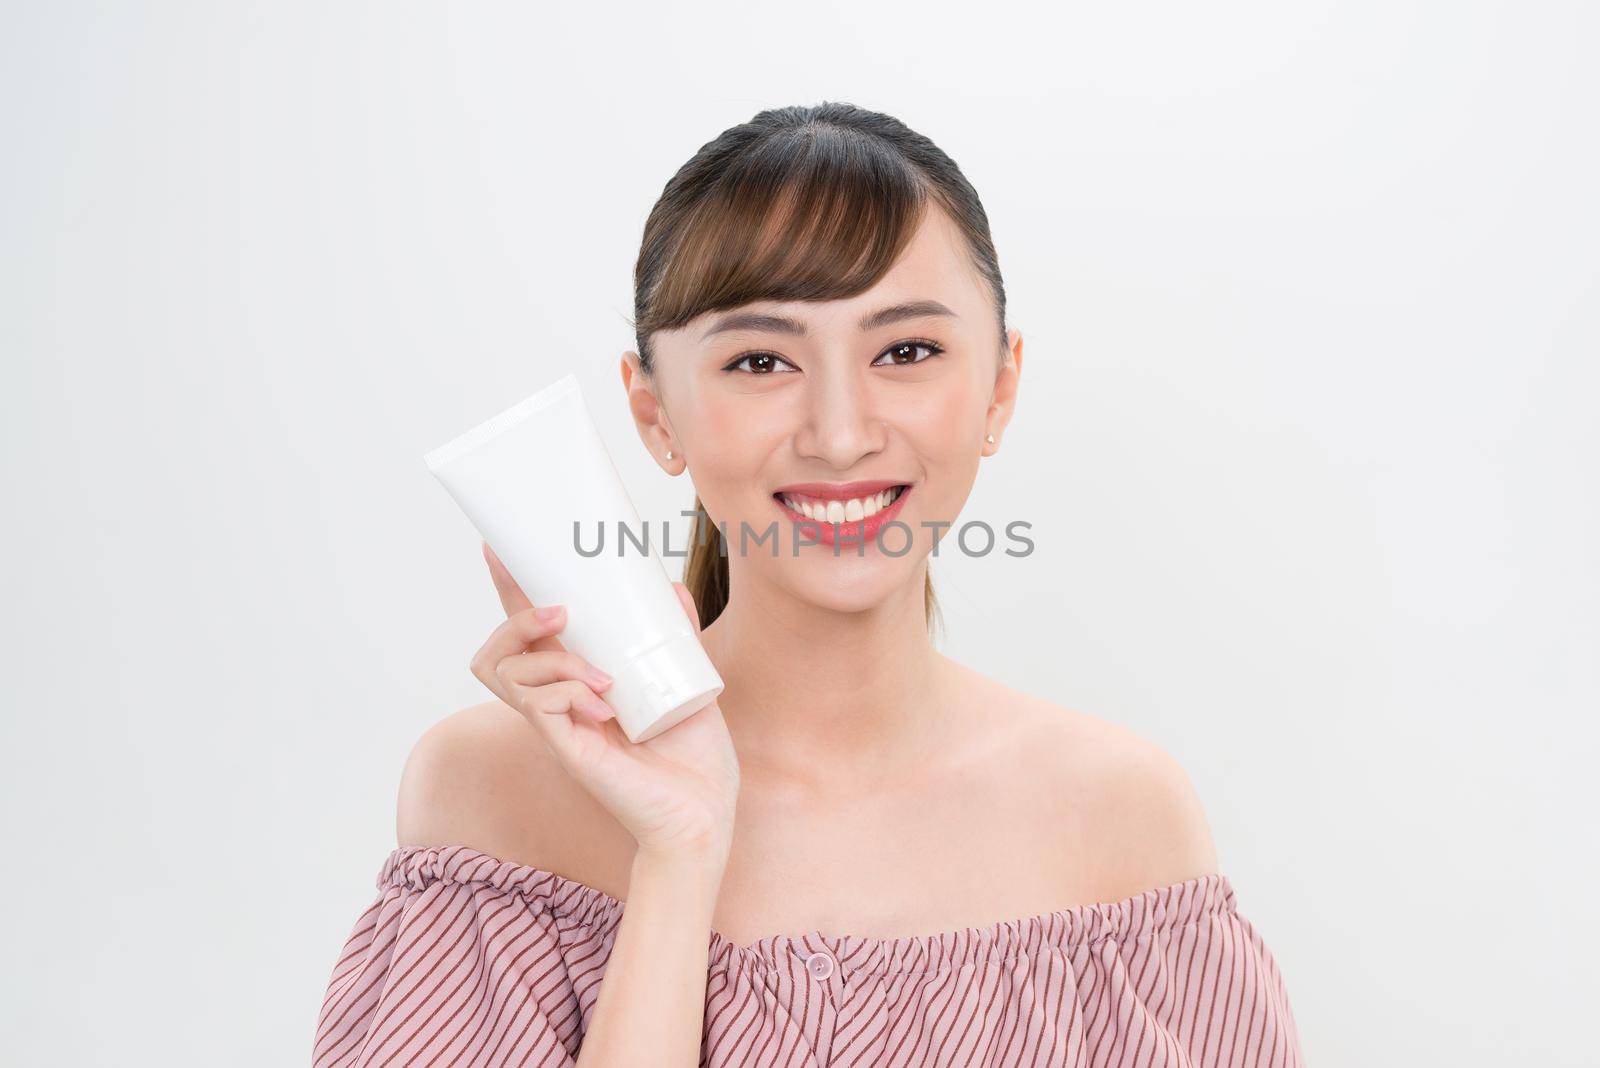 smiling young woman showing skincare products 